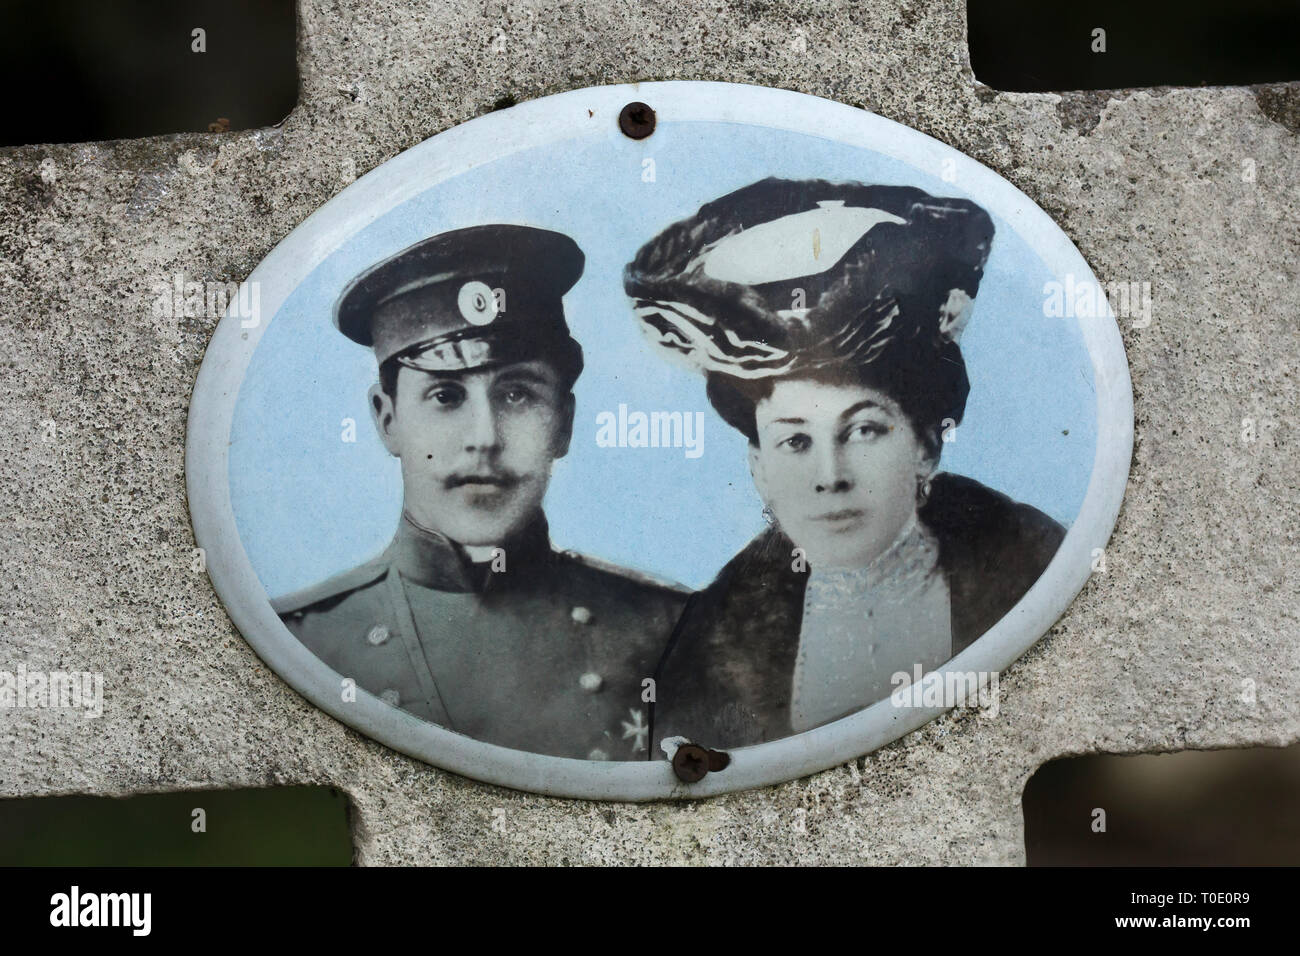 Photograph of Russian military officer Boris Arapov and his wife Zinaida Arapova, née Princess Golitsyn, on their tombstone at the Russian Cemetery in Sainte-Geneviève-des-Bois (Cimetière russe de Sainte-Geneviève-des-Bois) near Paris, France. Russian nobleman Boris Arapov was born on 7 February 1880, left Russia at age about 40, spent about 17 years in exile and died at age 57 on 19 October 1937. His wife Zinaida Arapova was born on 12 April 1881 as Princess Golitsyn, left Russia at age about 40, spent less than ten years in exile and died at age 46 on 5 February 1928. Stock Photo